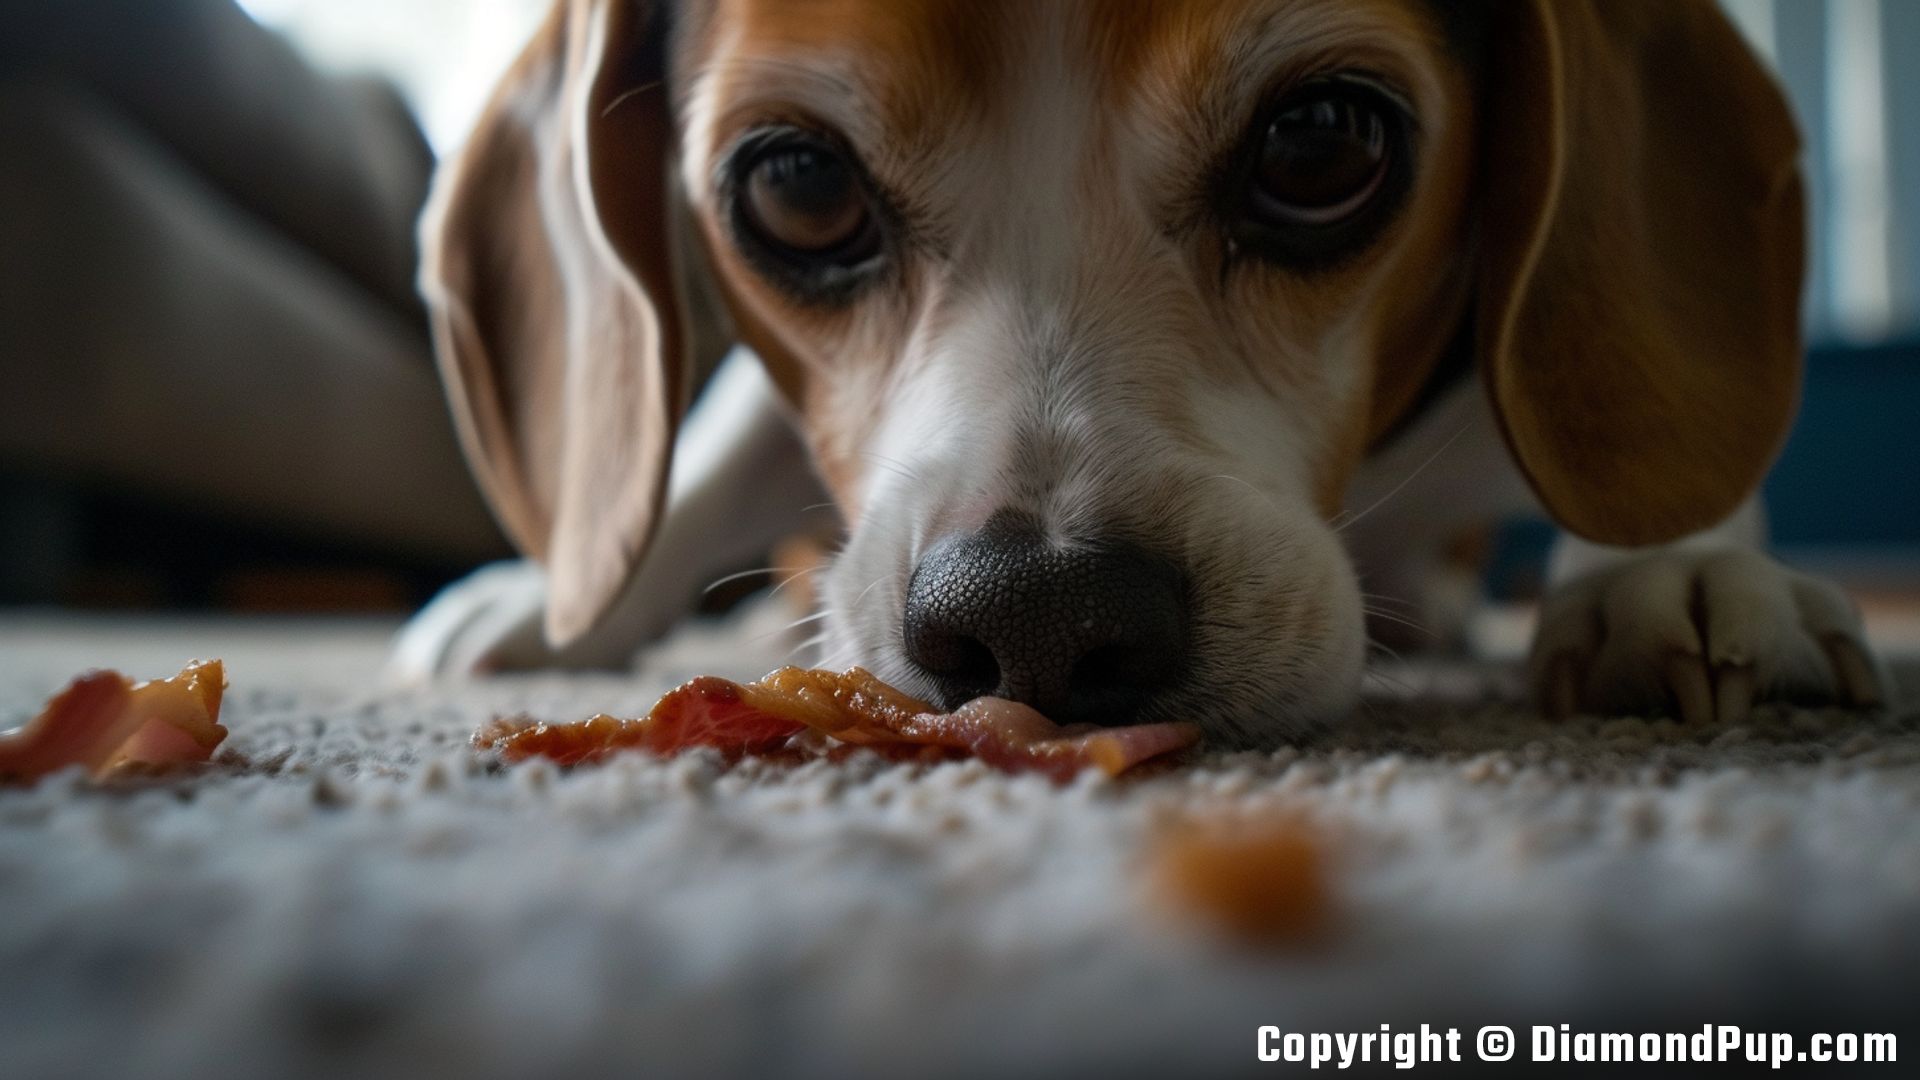 Image of an Adorable Beagle Snacking on Bacon